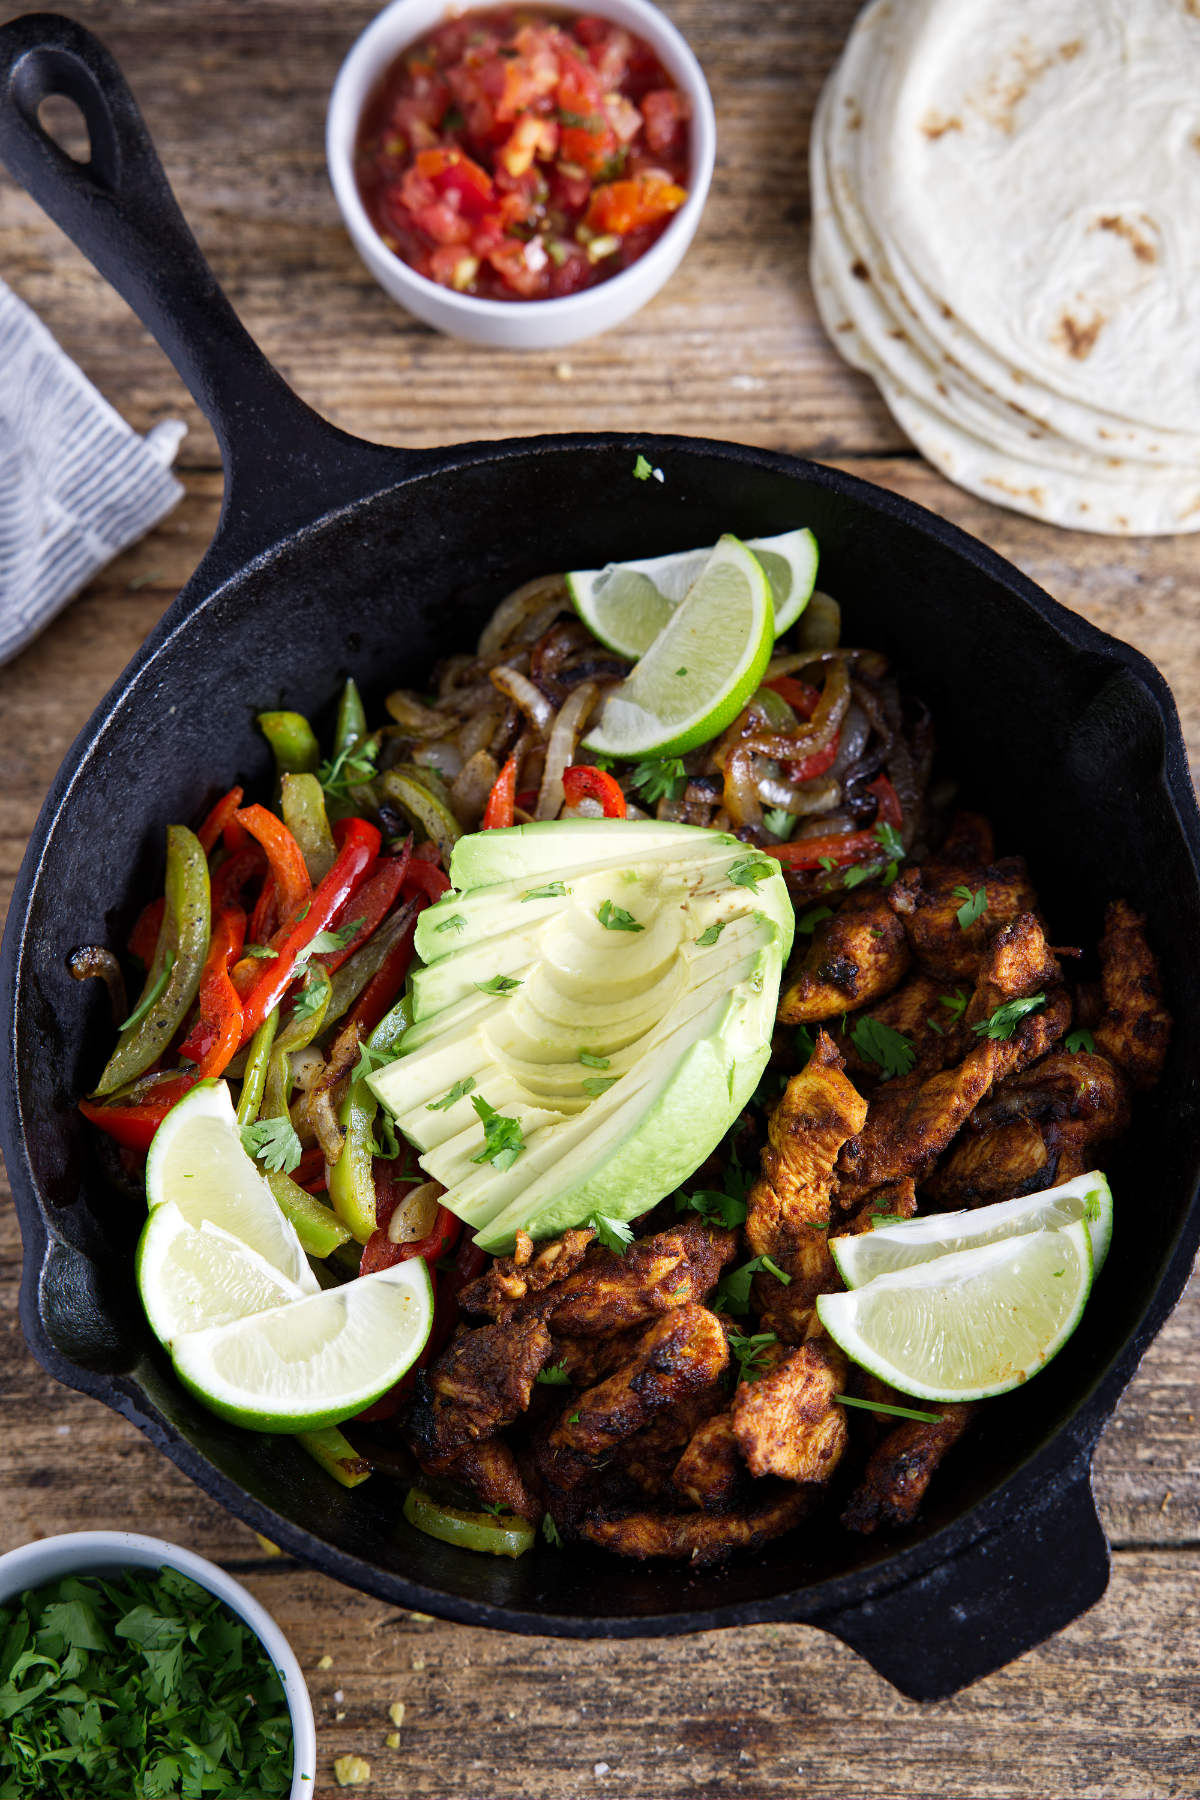 Cast iron filled with chicken fajitas that have been carmelized to perfection and topped with limes and avocado and surrounded by tortillas, salsa, and cilantro.